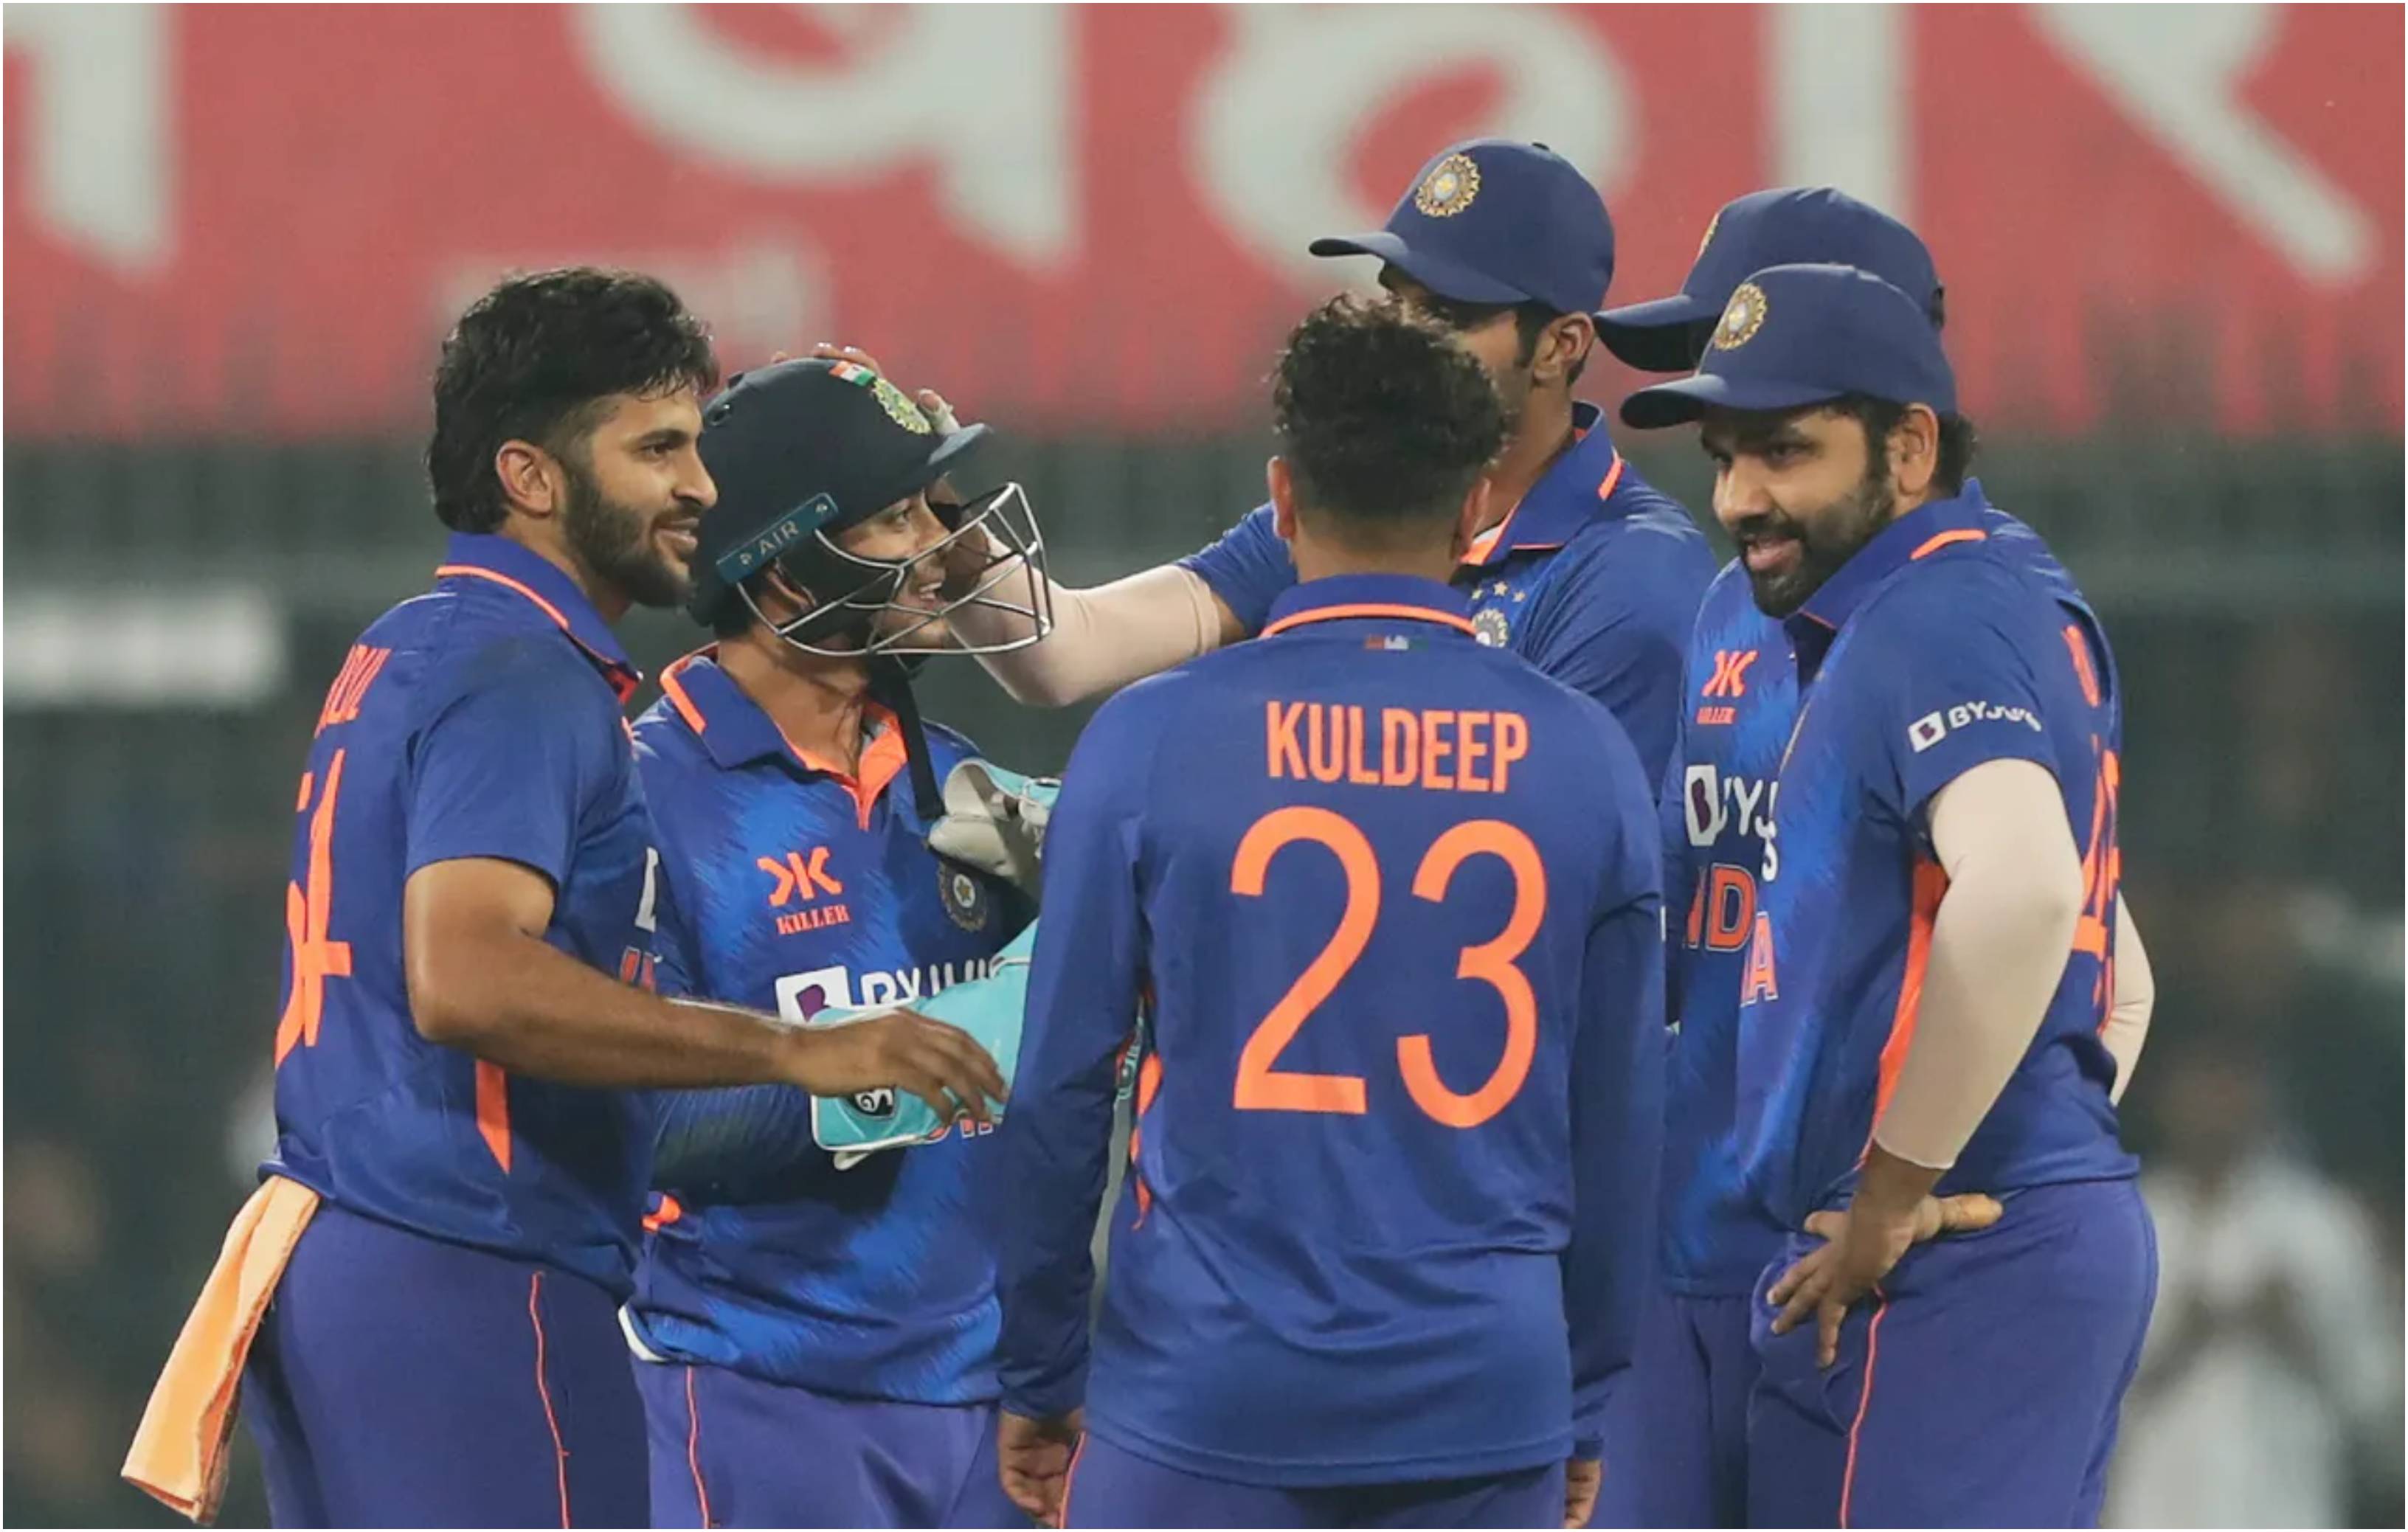 India outplayed New Zealand in the third ODI | BCCI